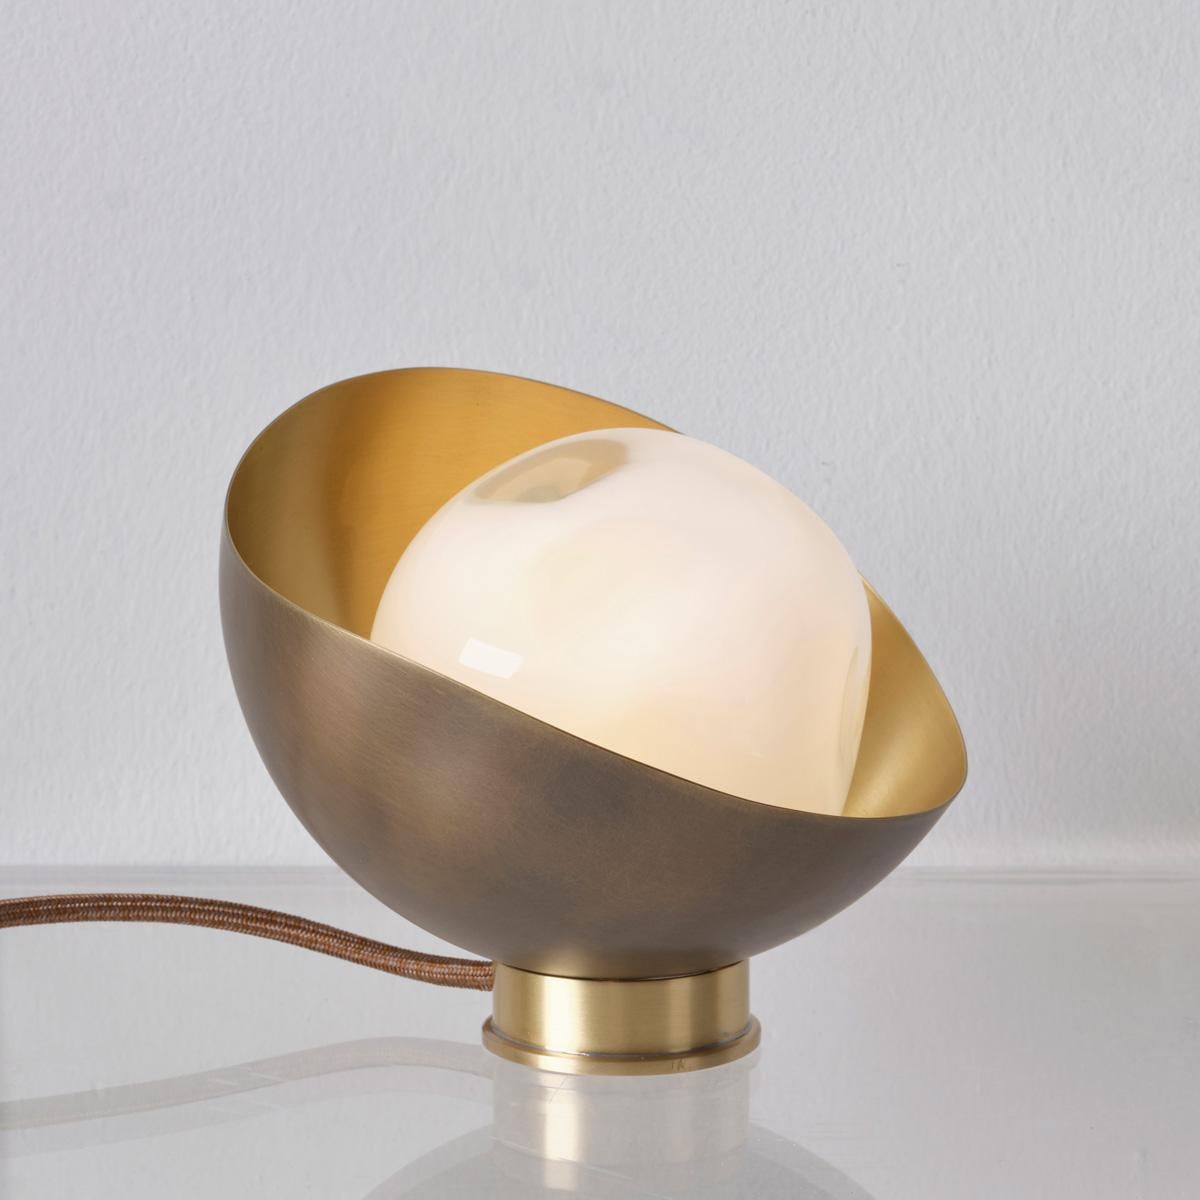 Modern Perla Mini Table Lamp by Gaspare Asaro. Sand White and Satin Brass Finish For Sale